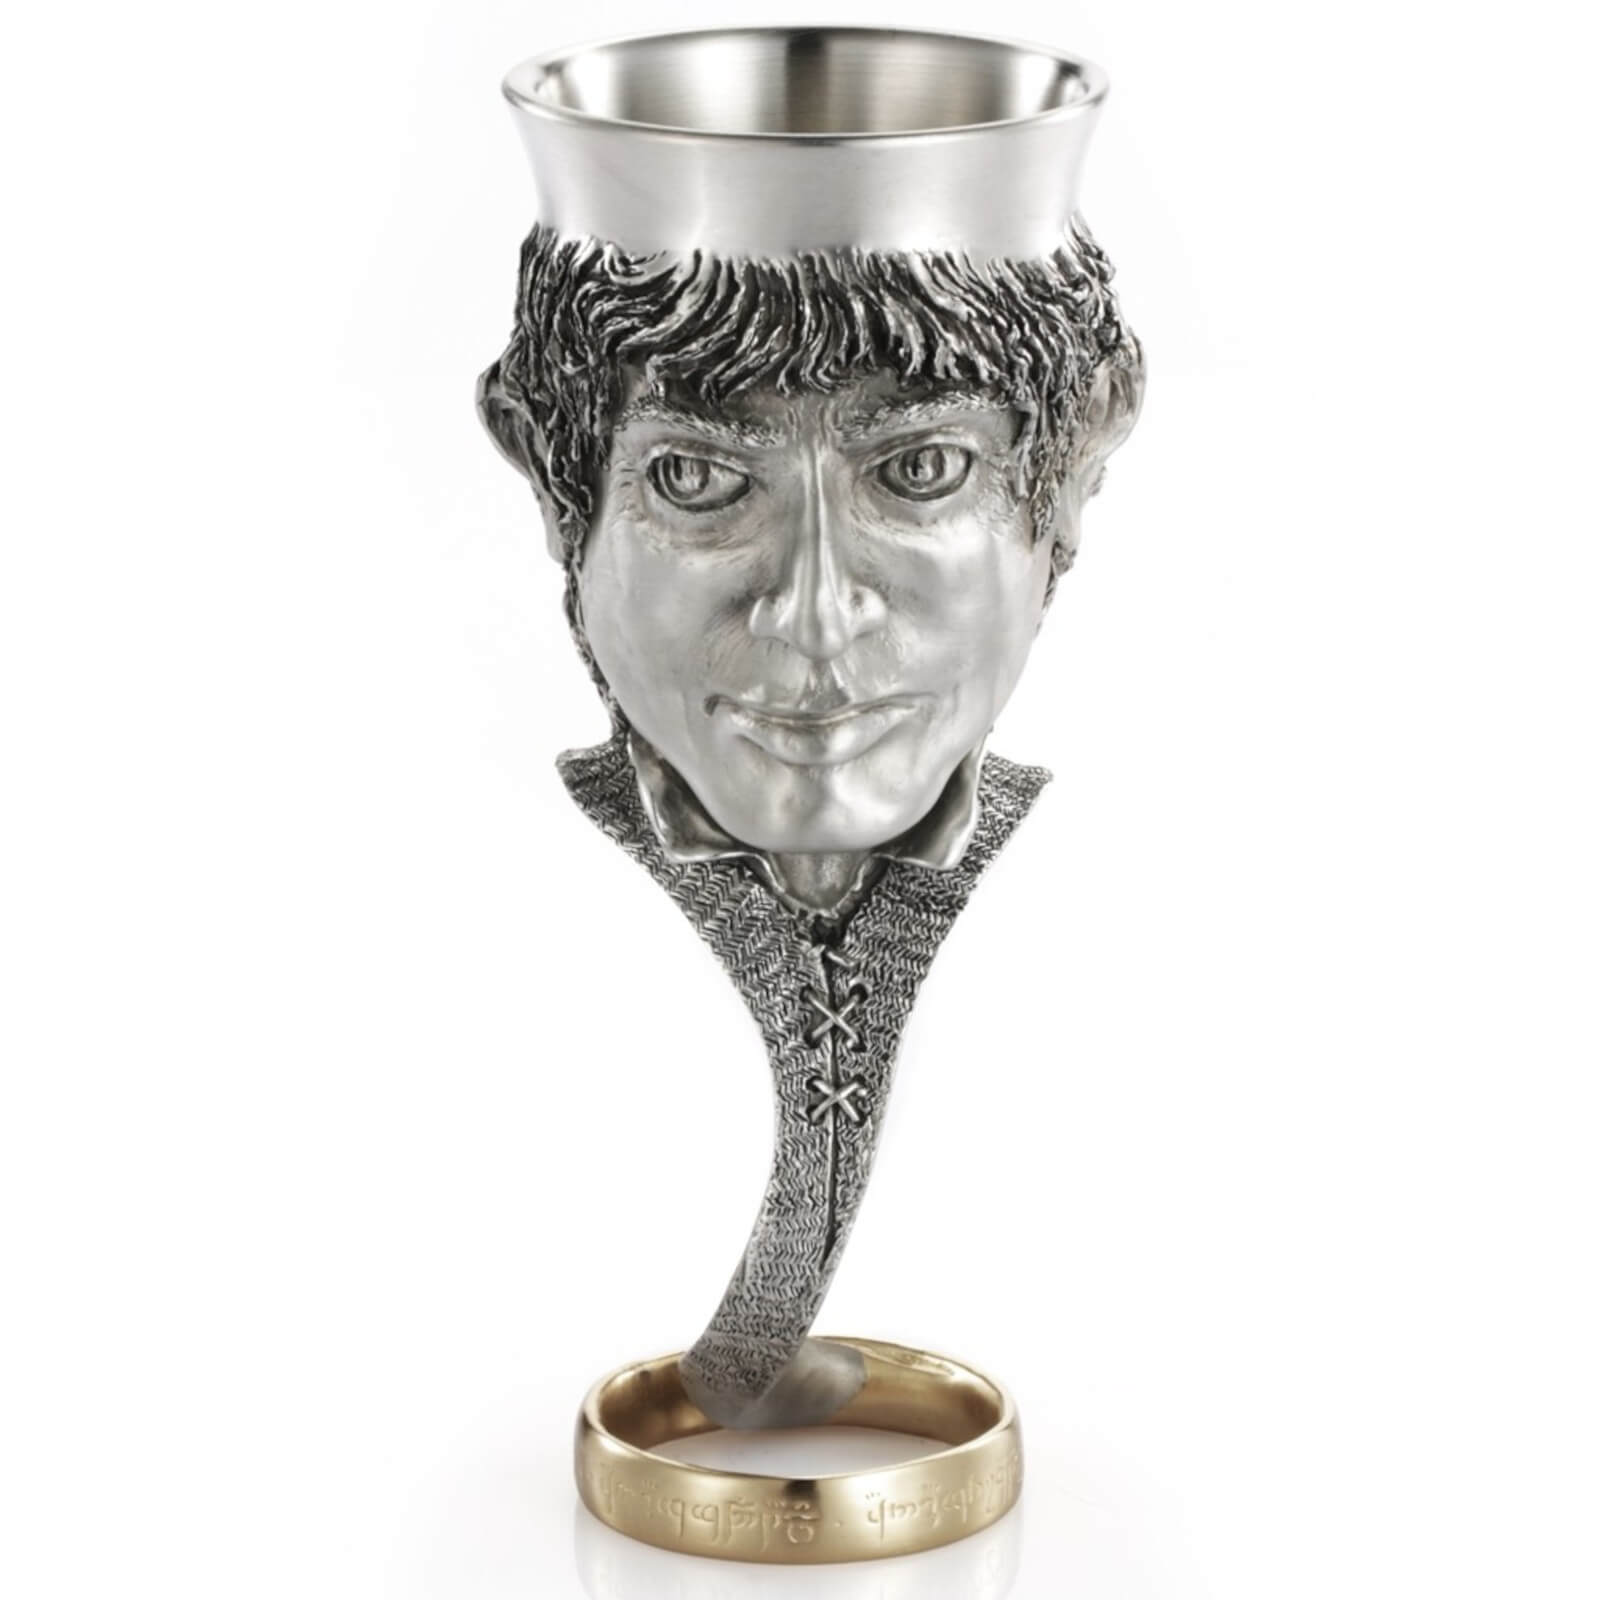 Image of Royal Selangor Lord of the Rings Pewter Goblet - Frodo